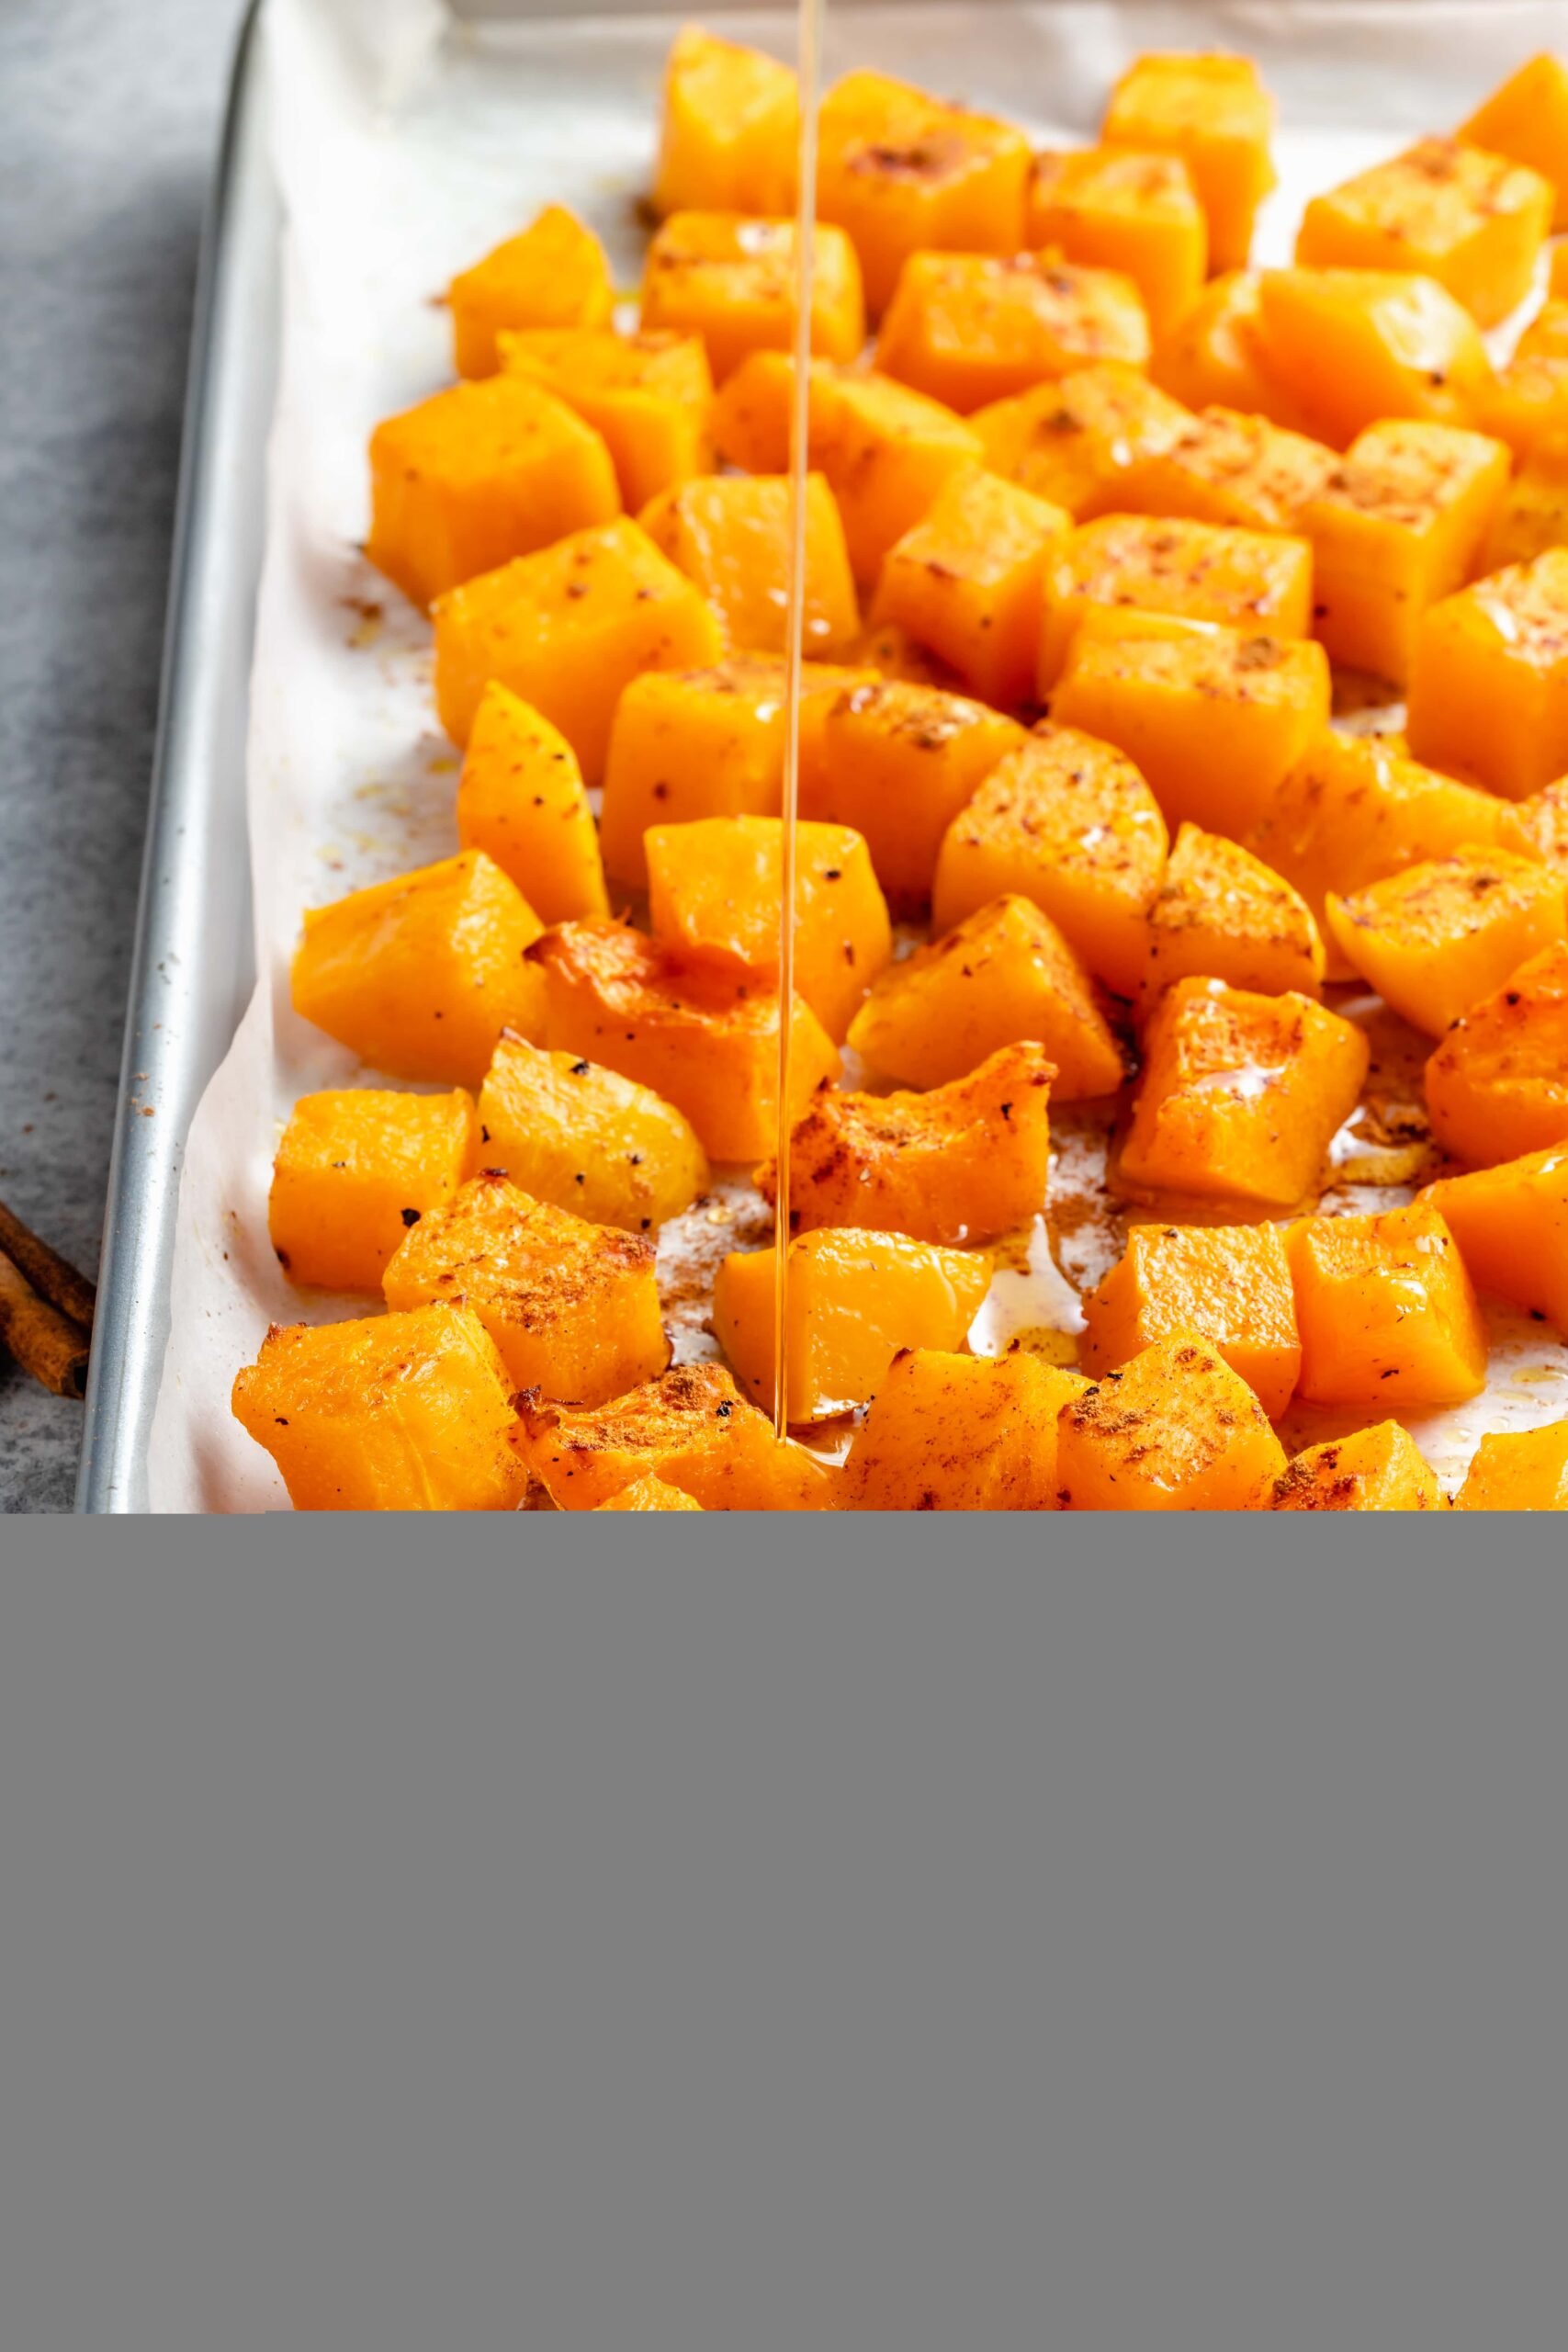 How to Roast Butternut Squash - All the Healthy Things